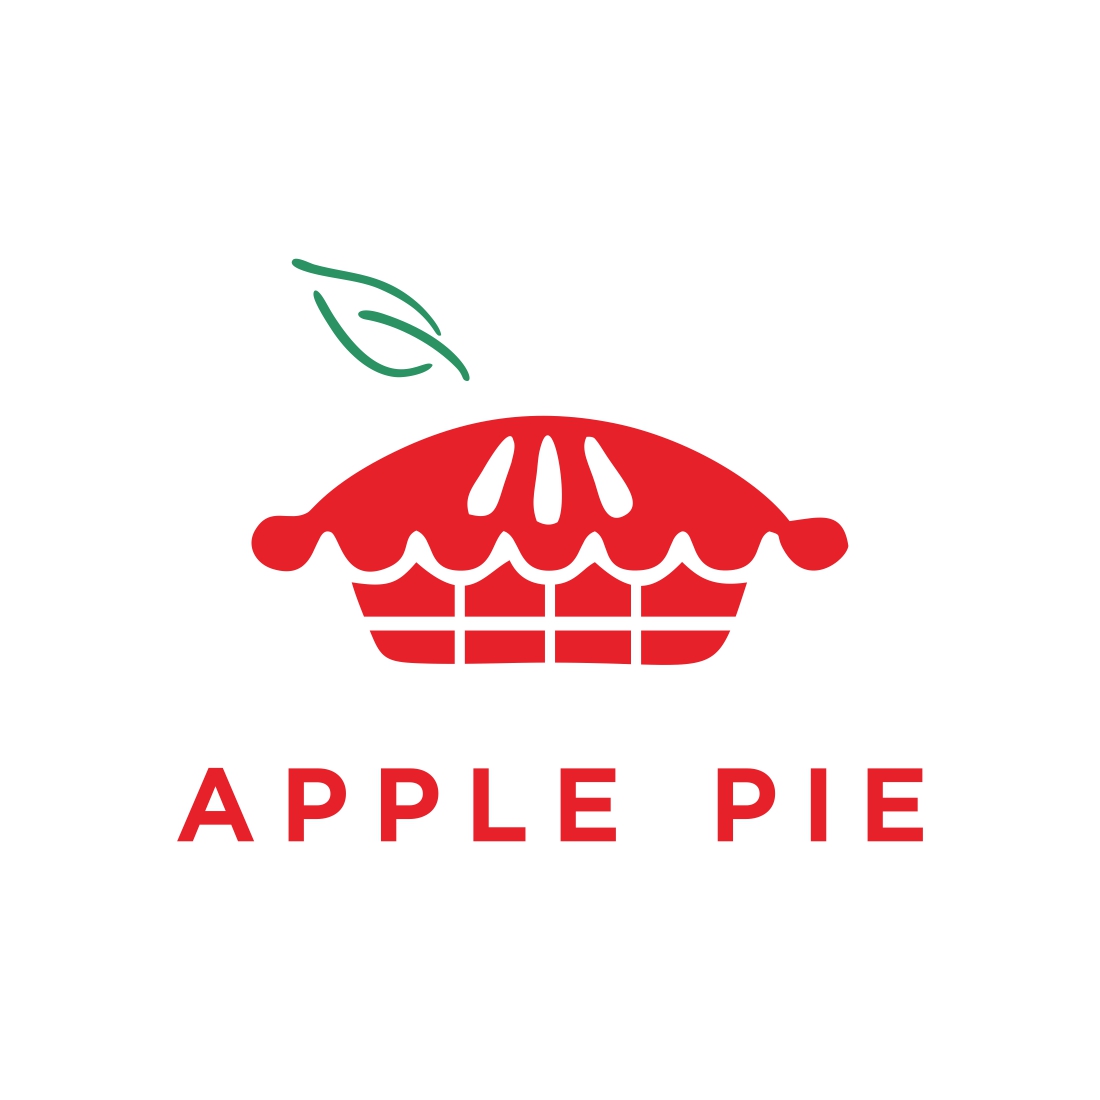 a dish made from a pastry dish filled with various sweet ingredients such as apples logo tamplate preview image.